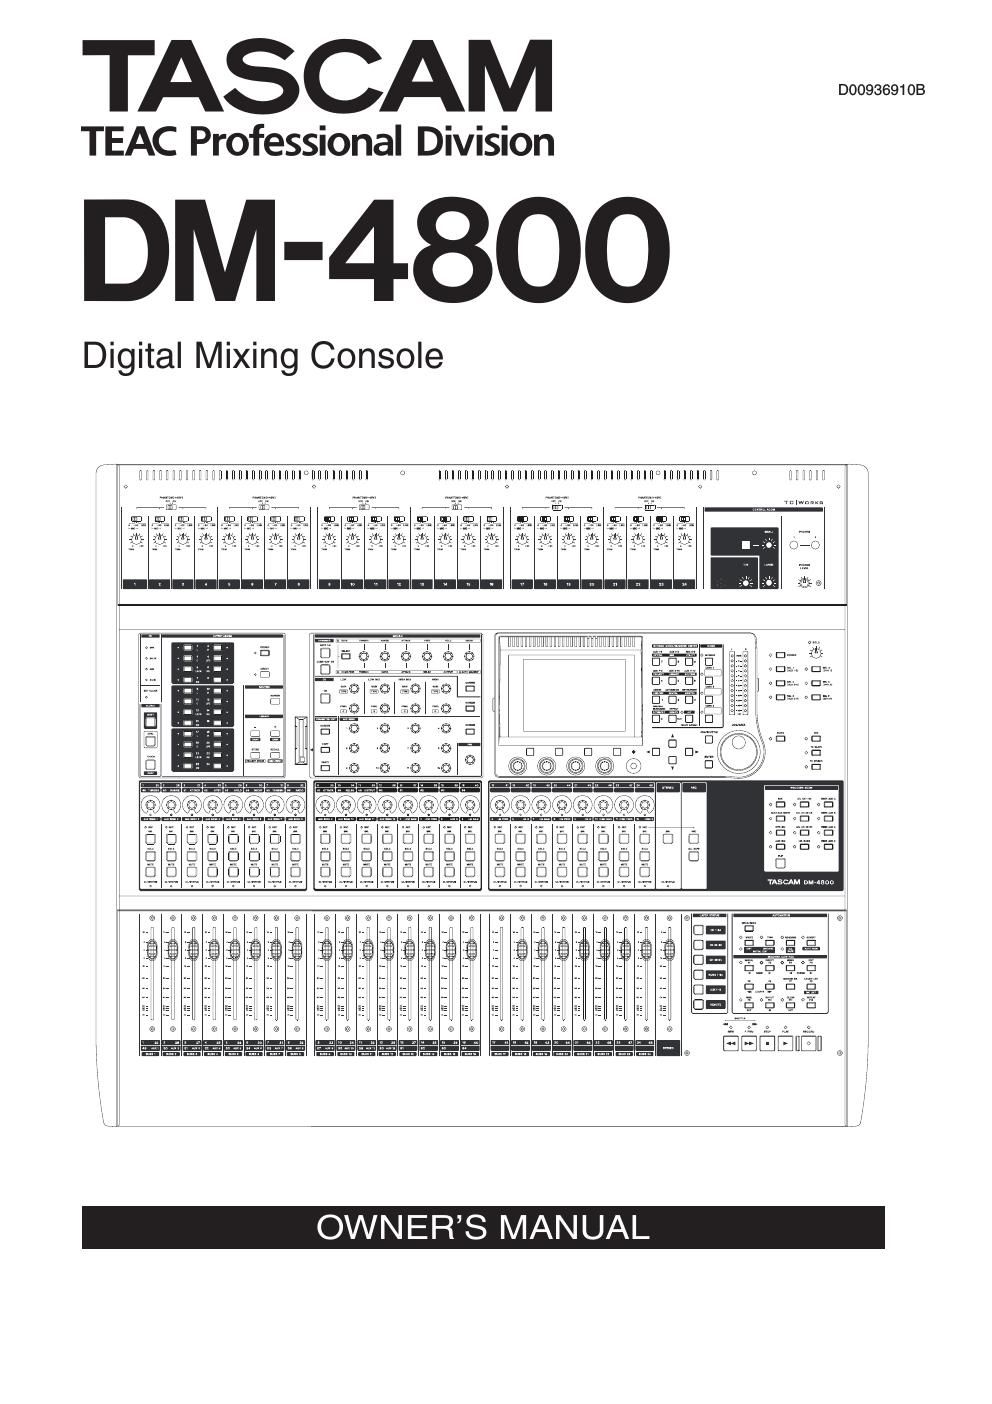 Tascam DM 4800 Owners Manual